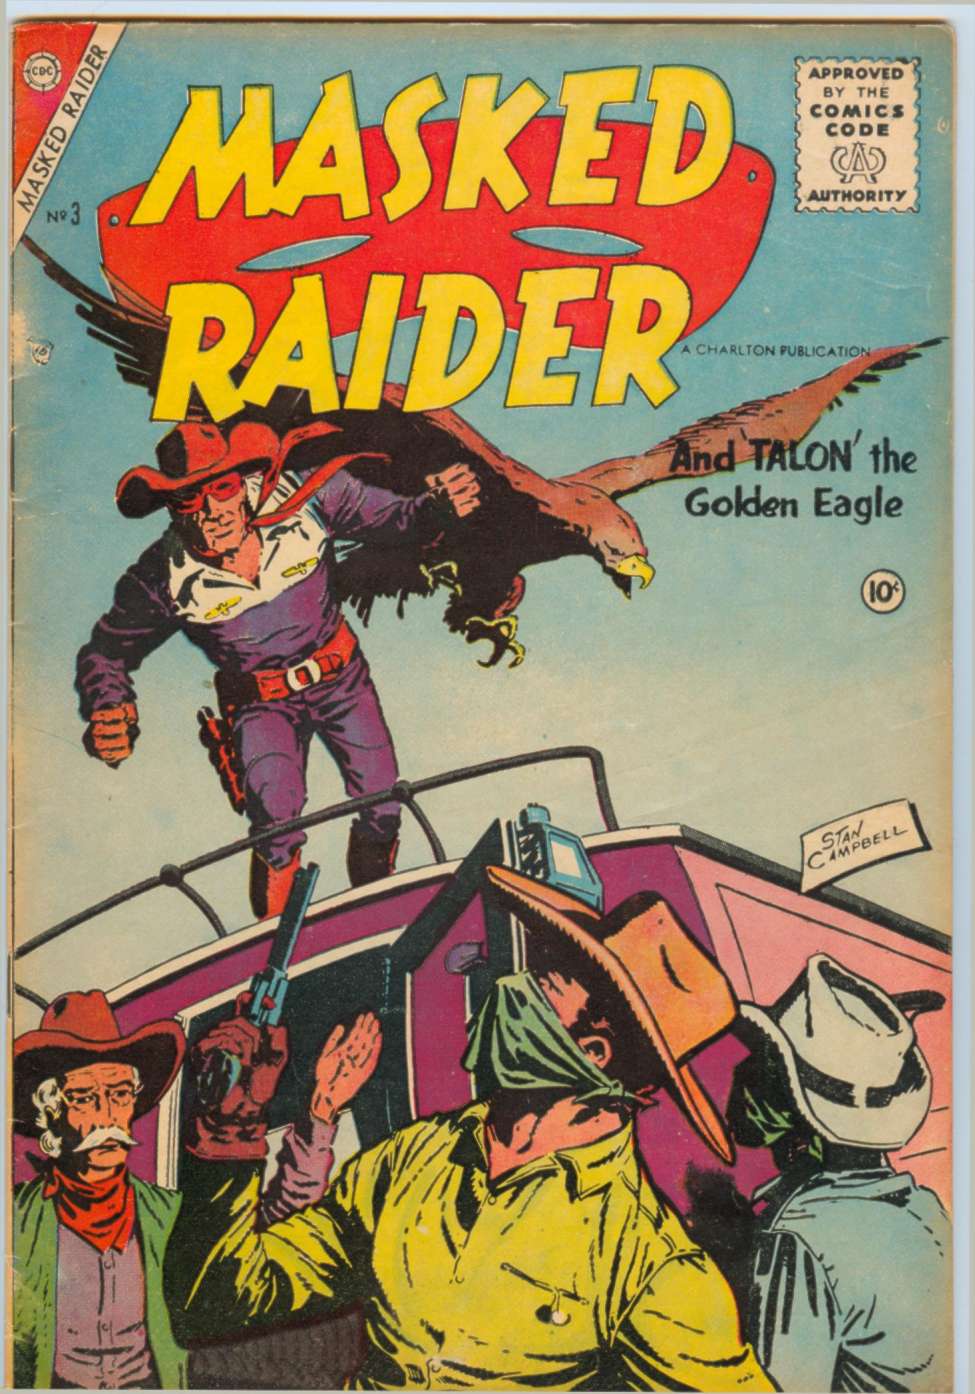 Book Cover For Masked Raider 3 - Version 1